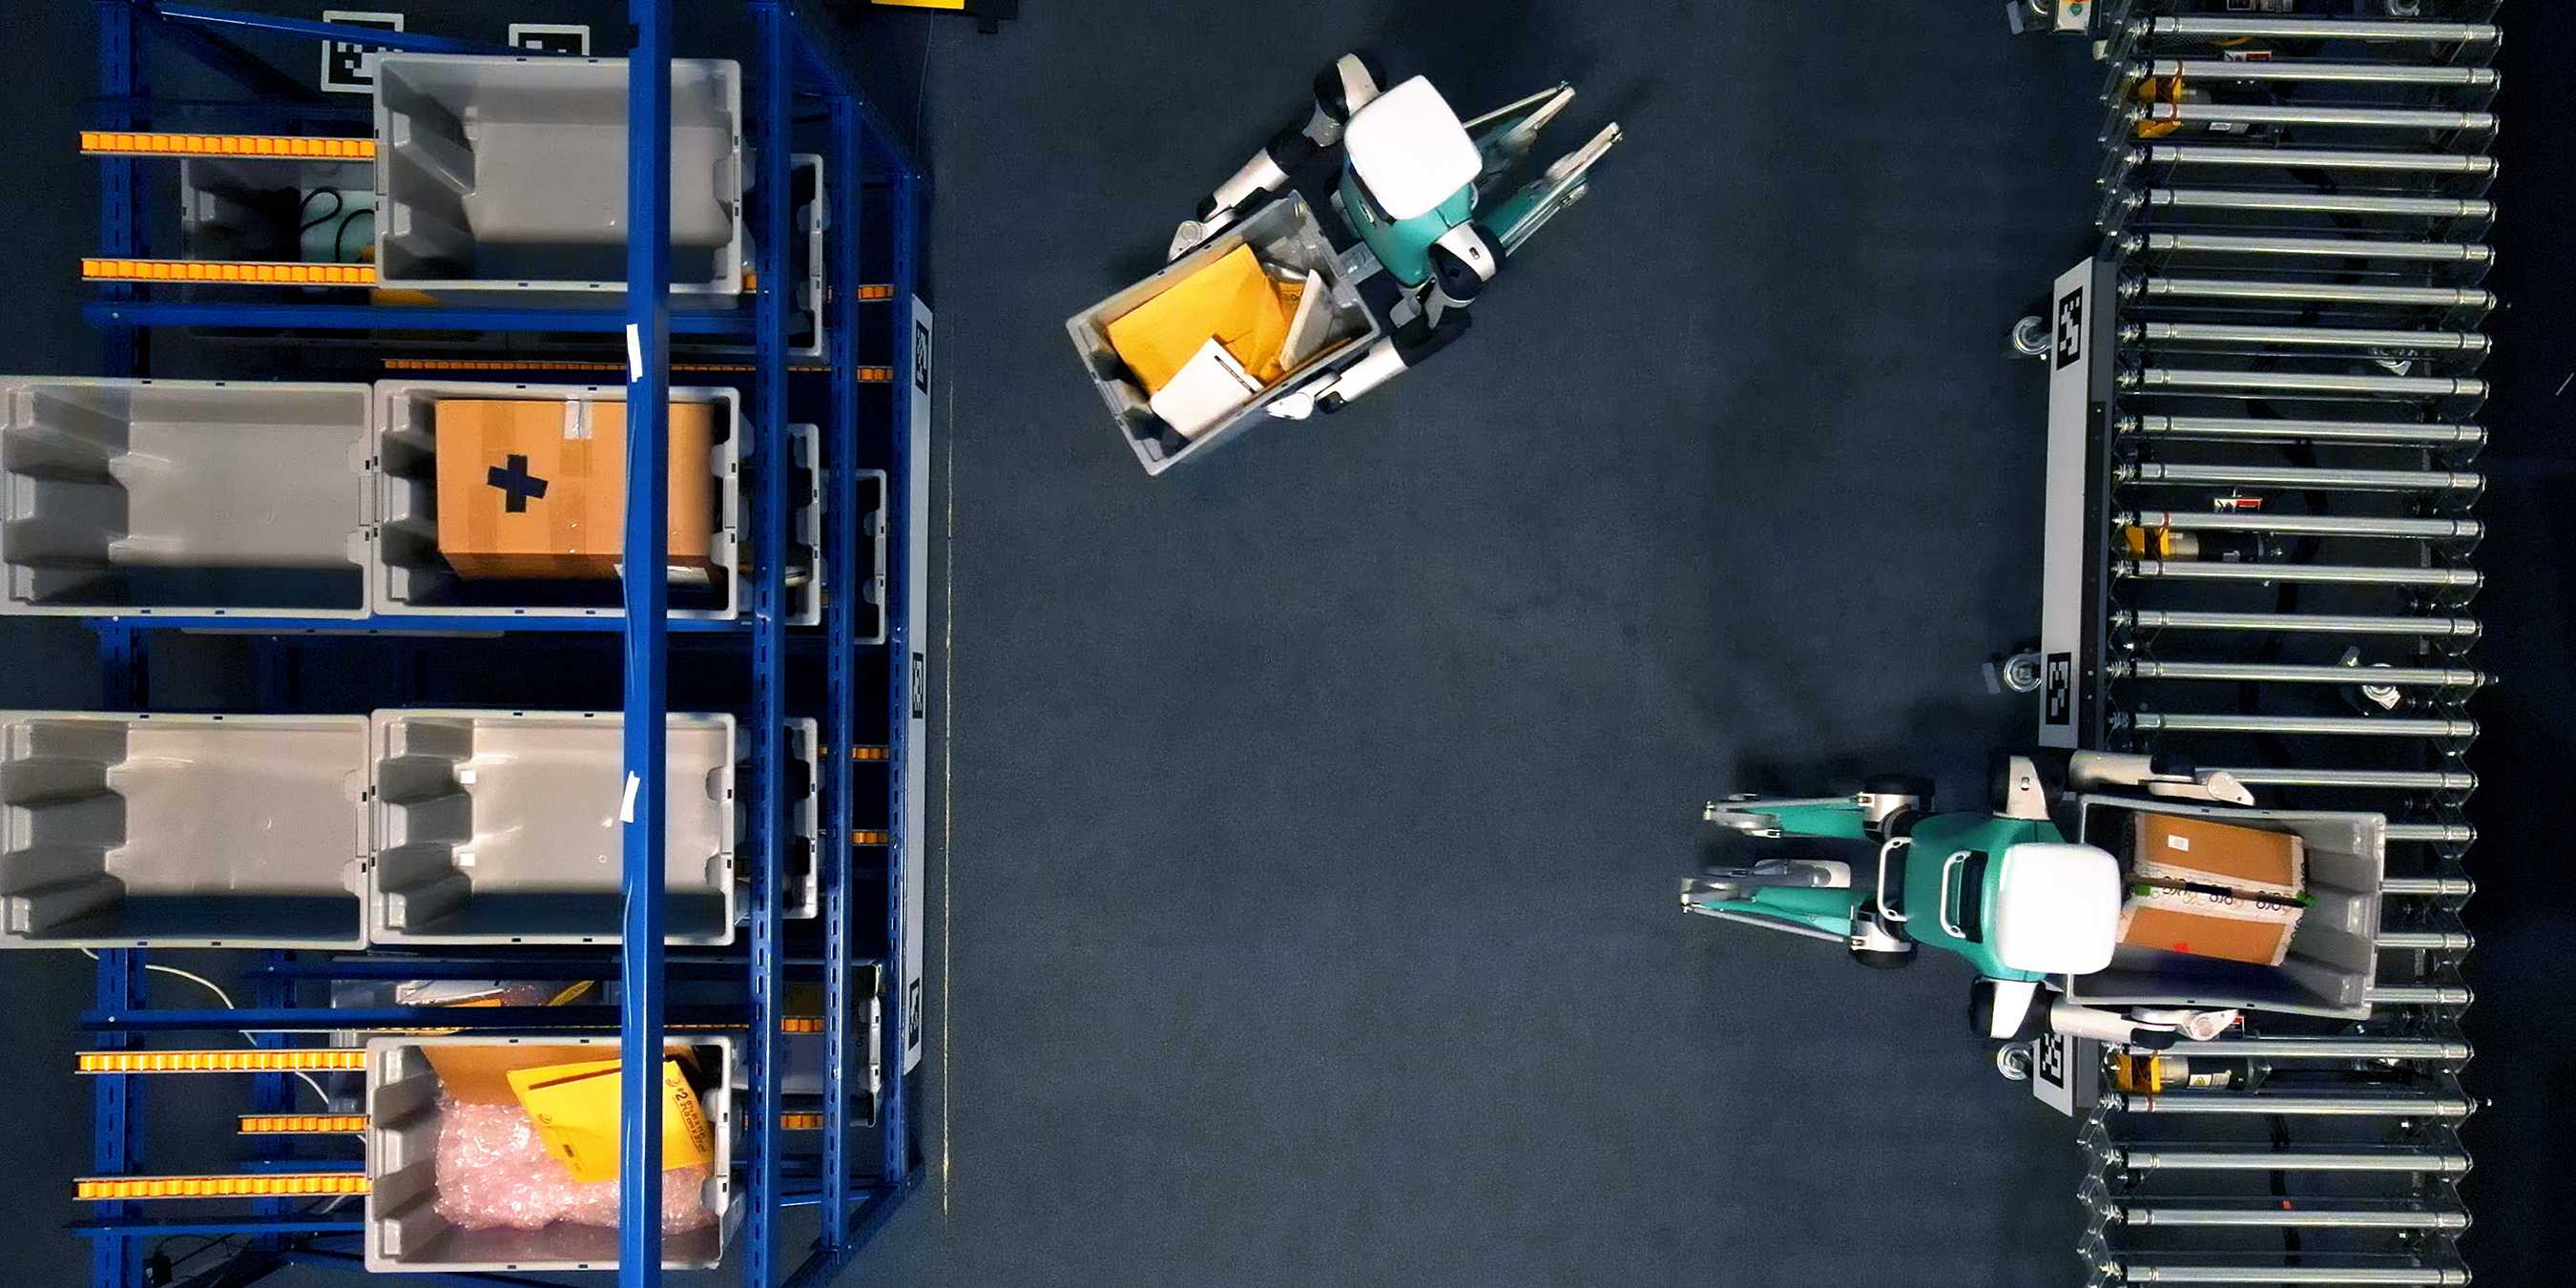 A bird's eye view of two Digit robots stocking shelves